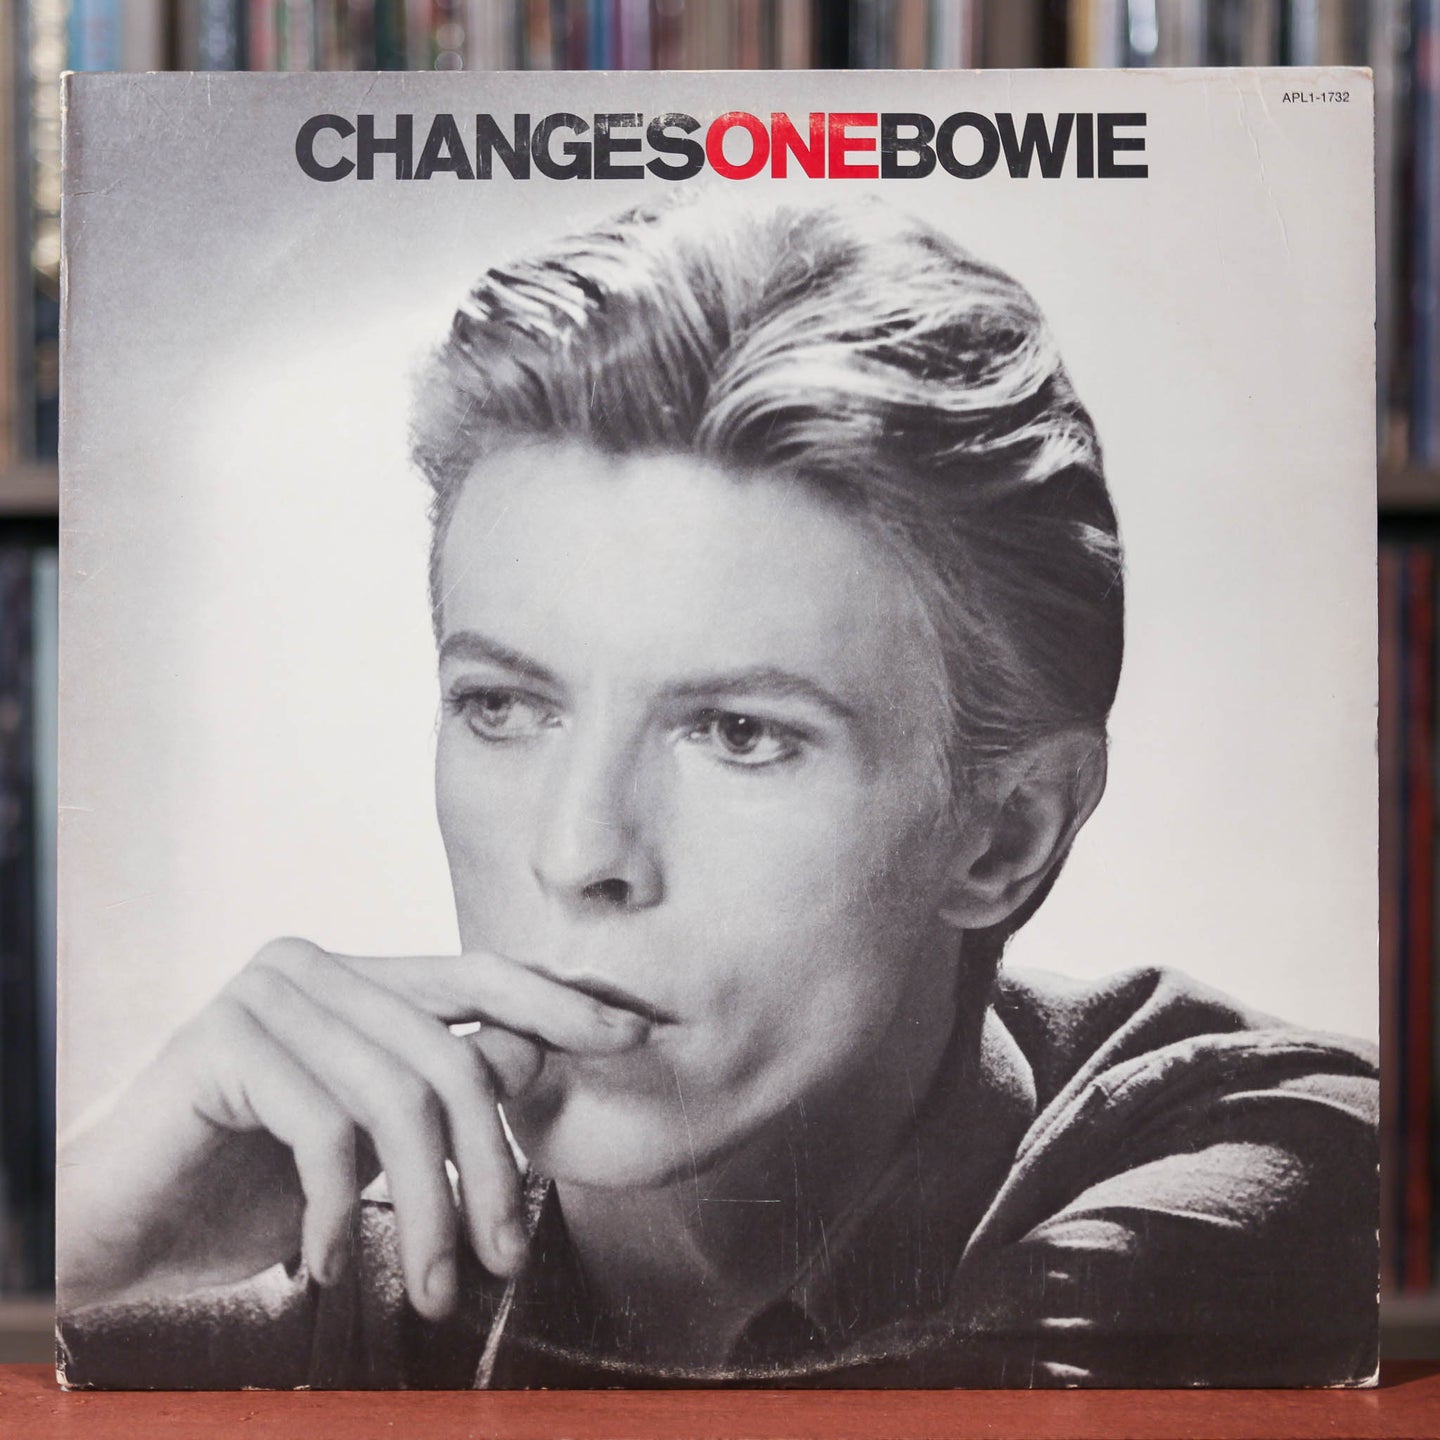 David Bowie - ChangesOneBowie - 1984 RCA Victor, VG/VG